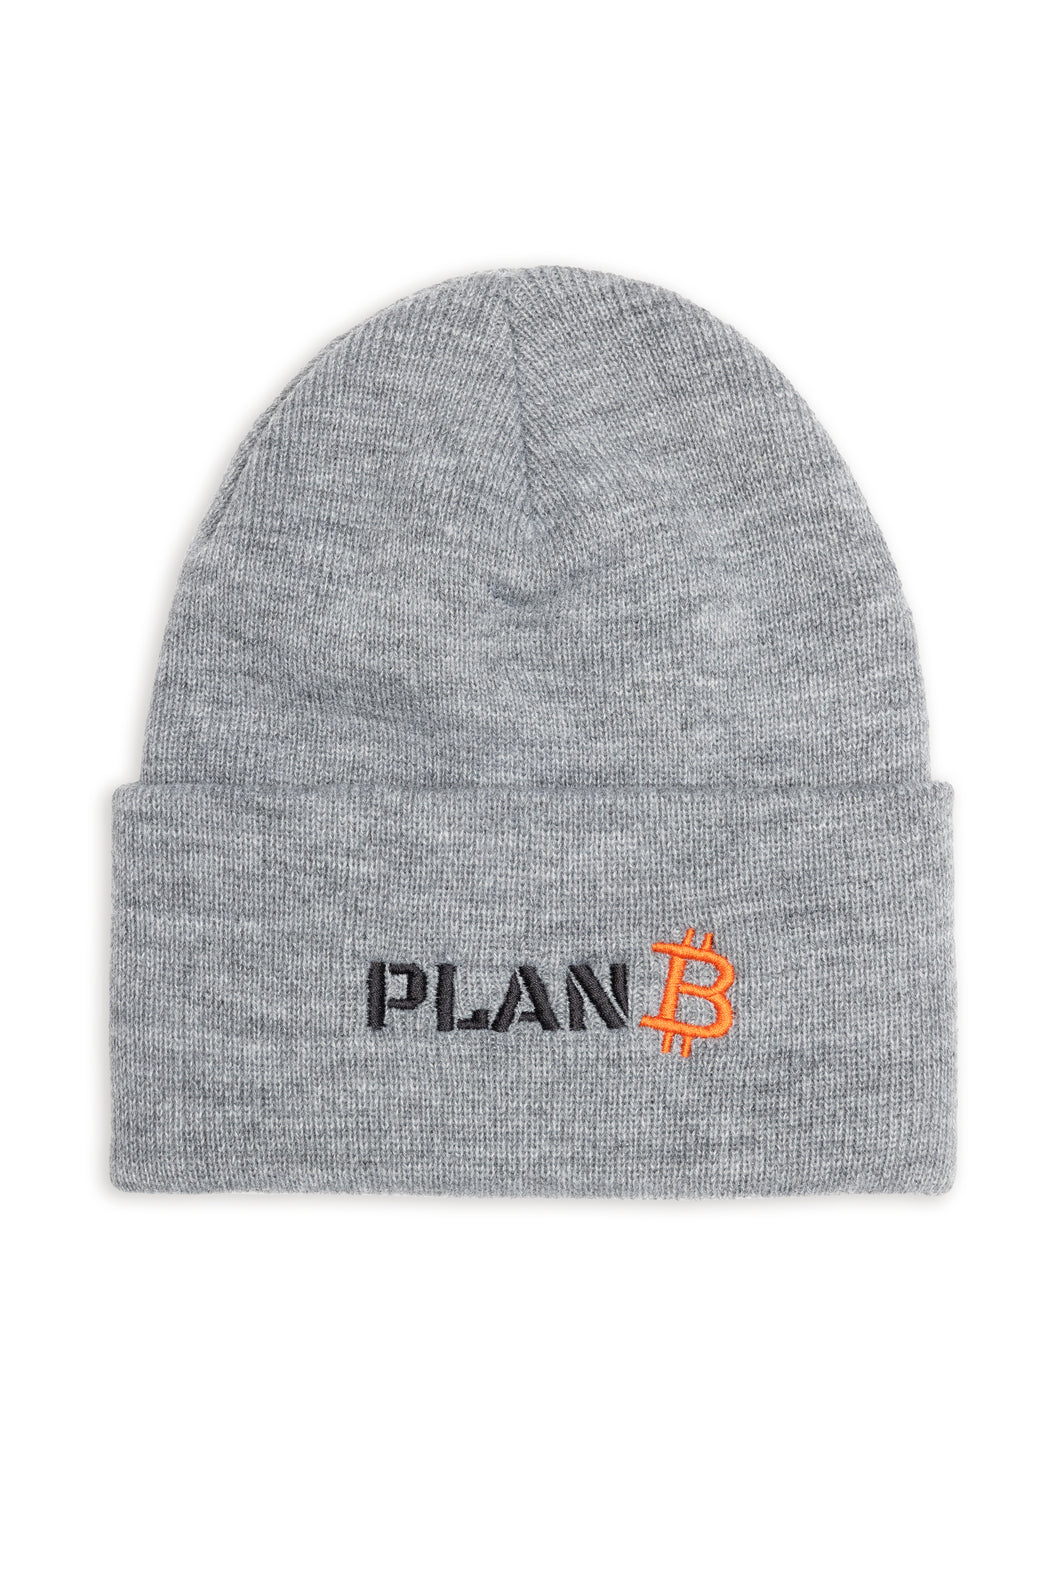 Grey PlanB beanie with black and orange embroidered PlanB logo on the front